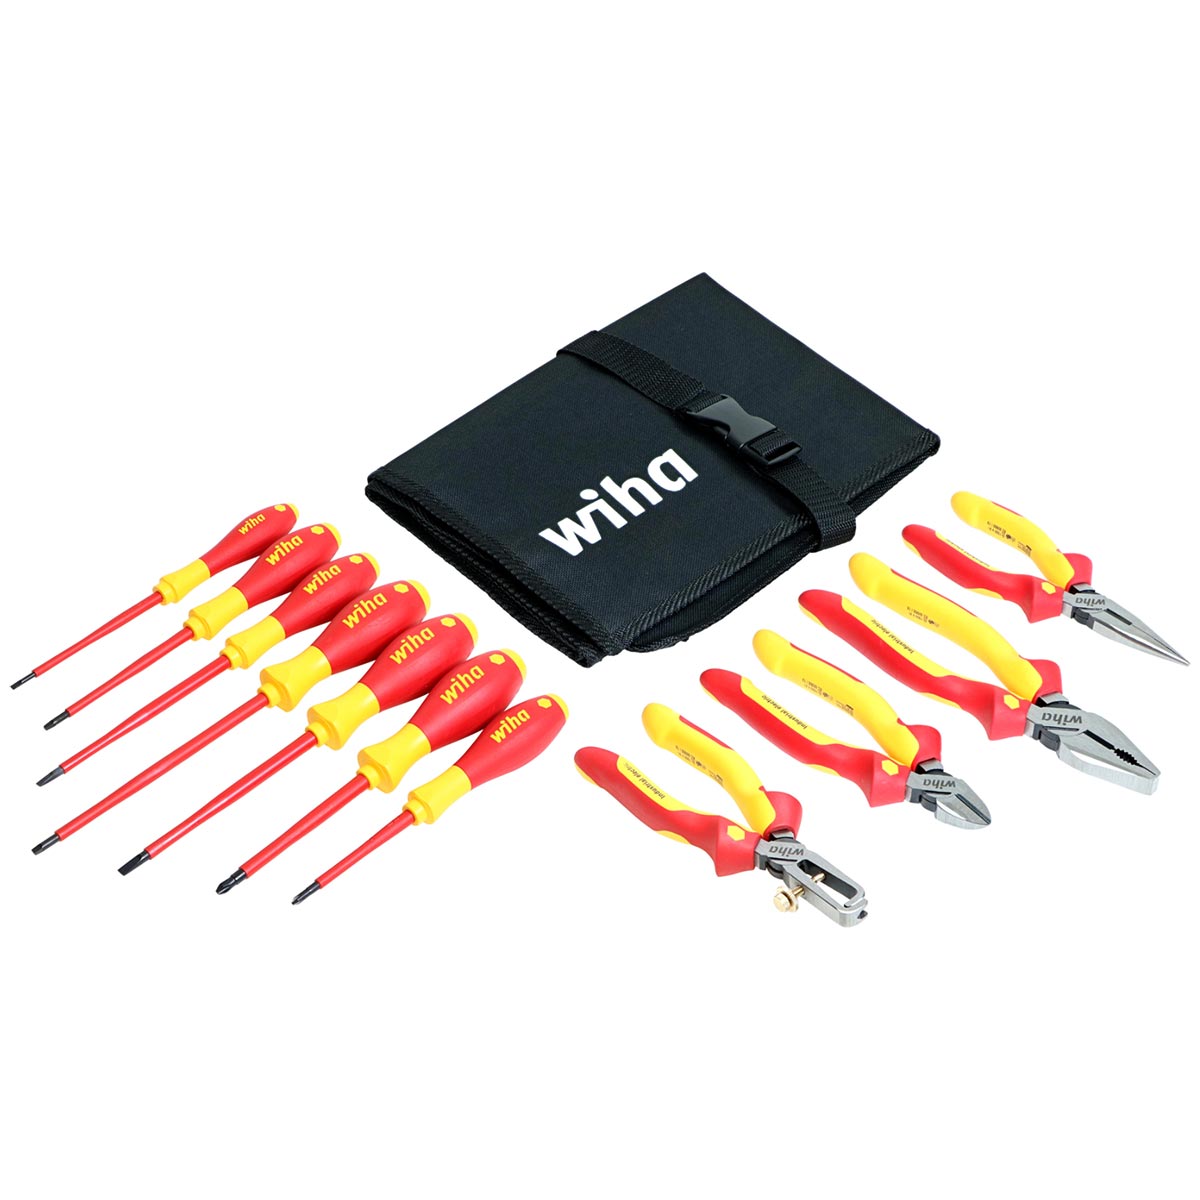 Wiha Insulated Pliers Cutters And Screwdriver - 11 Piece Set